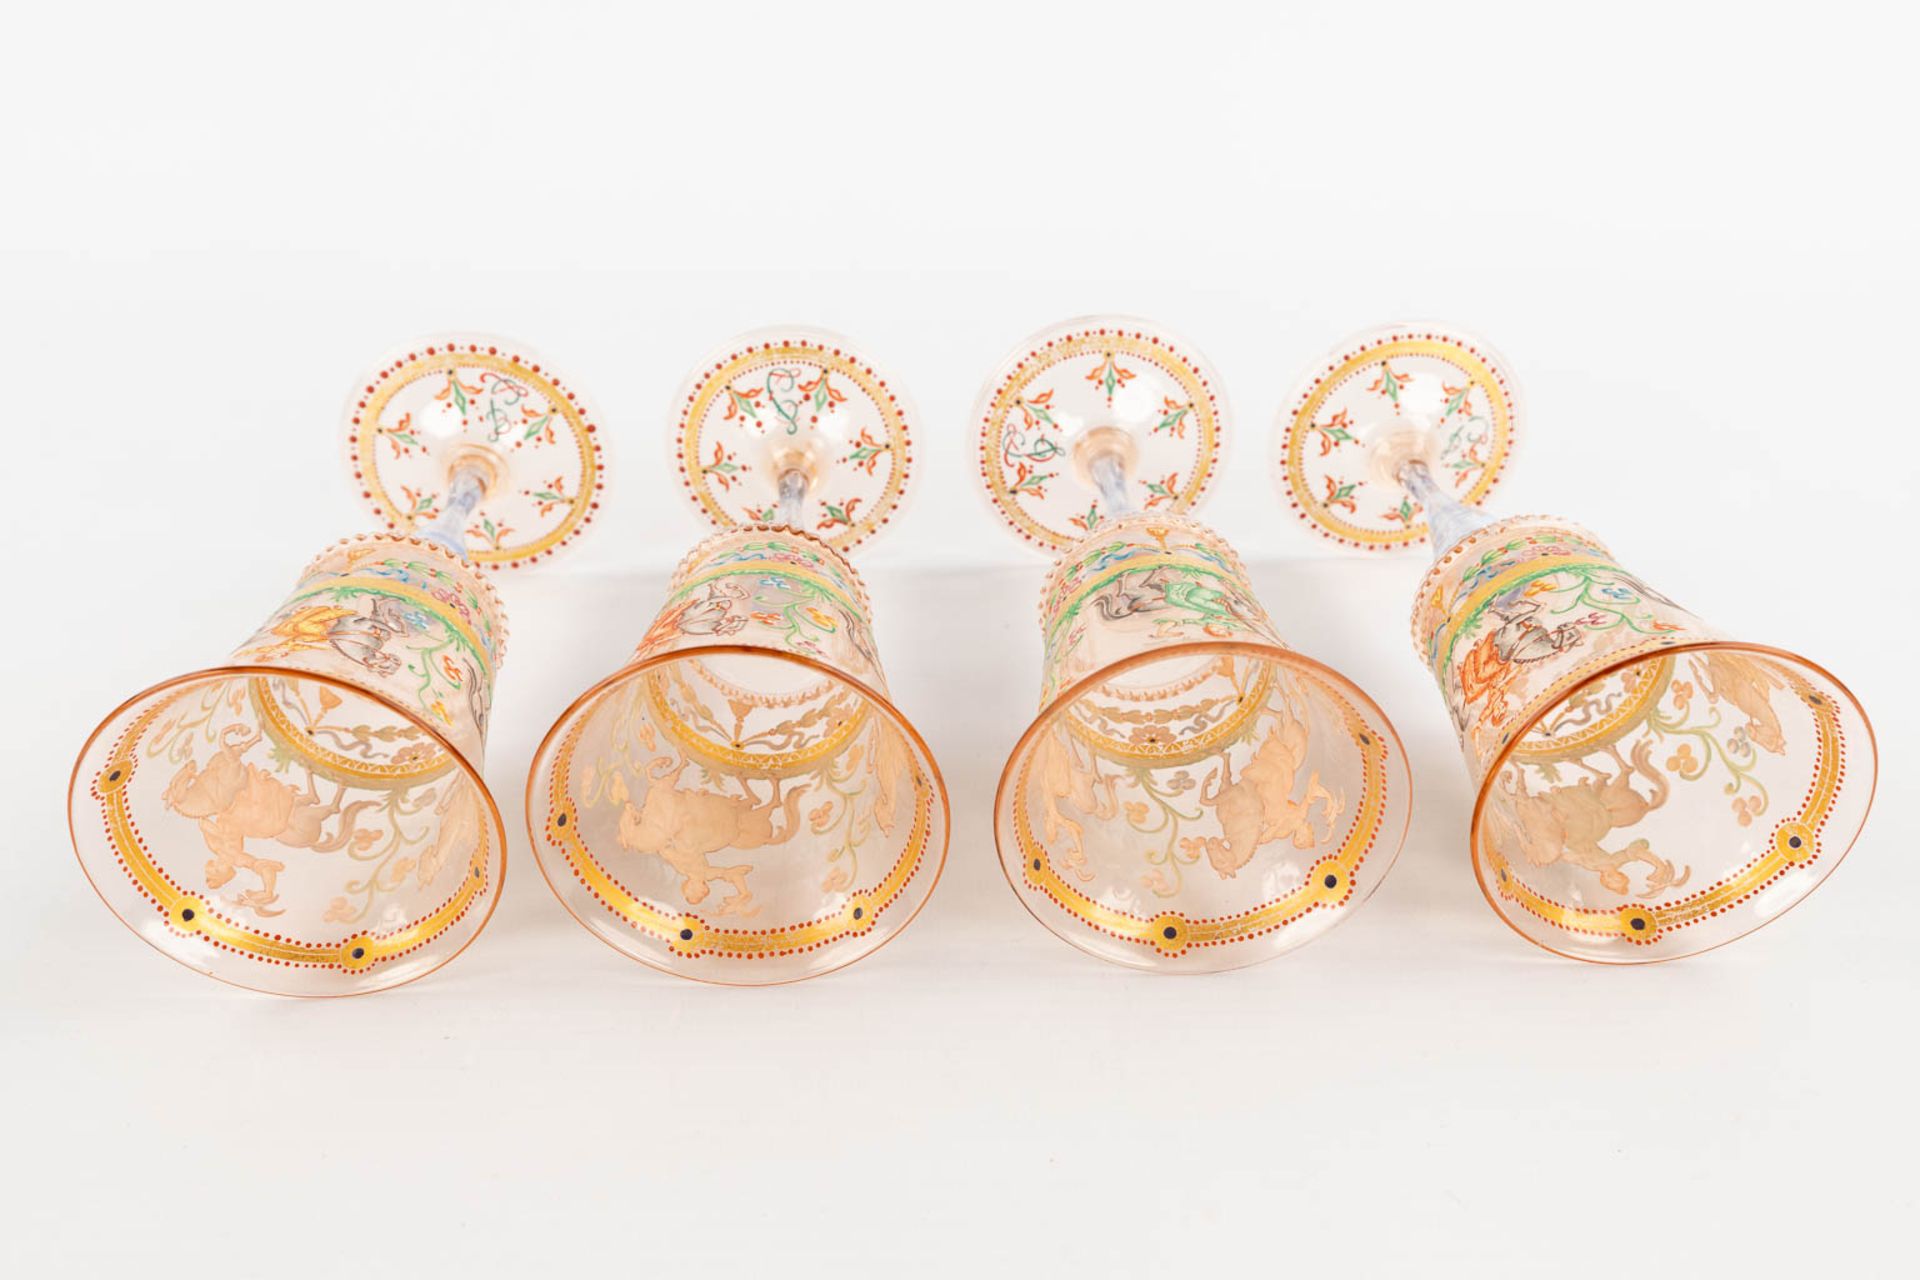 A set of 4 hand-painted and antique goblets, Murano, Salviati, 19th C. (H:17 x D:7 cm) - Image 9 of 16